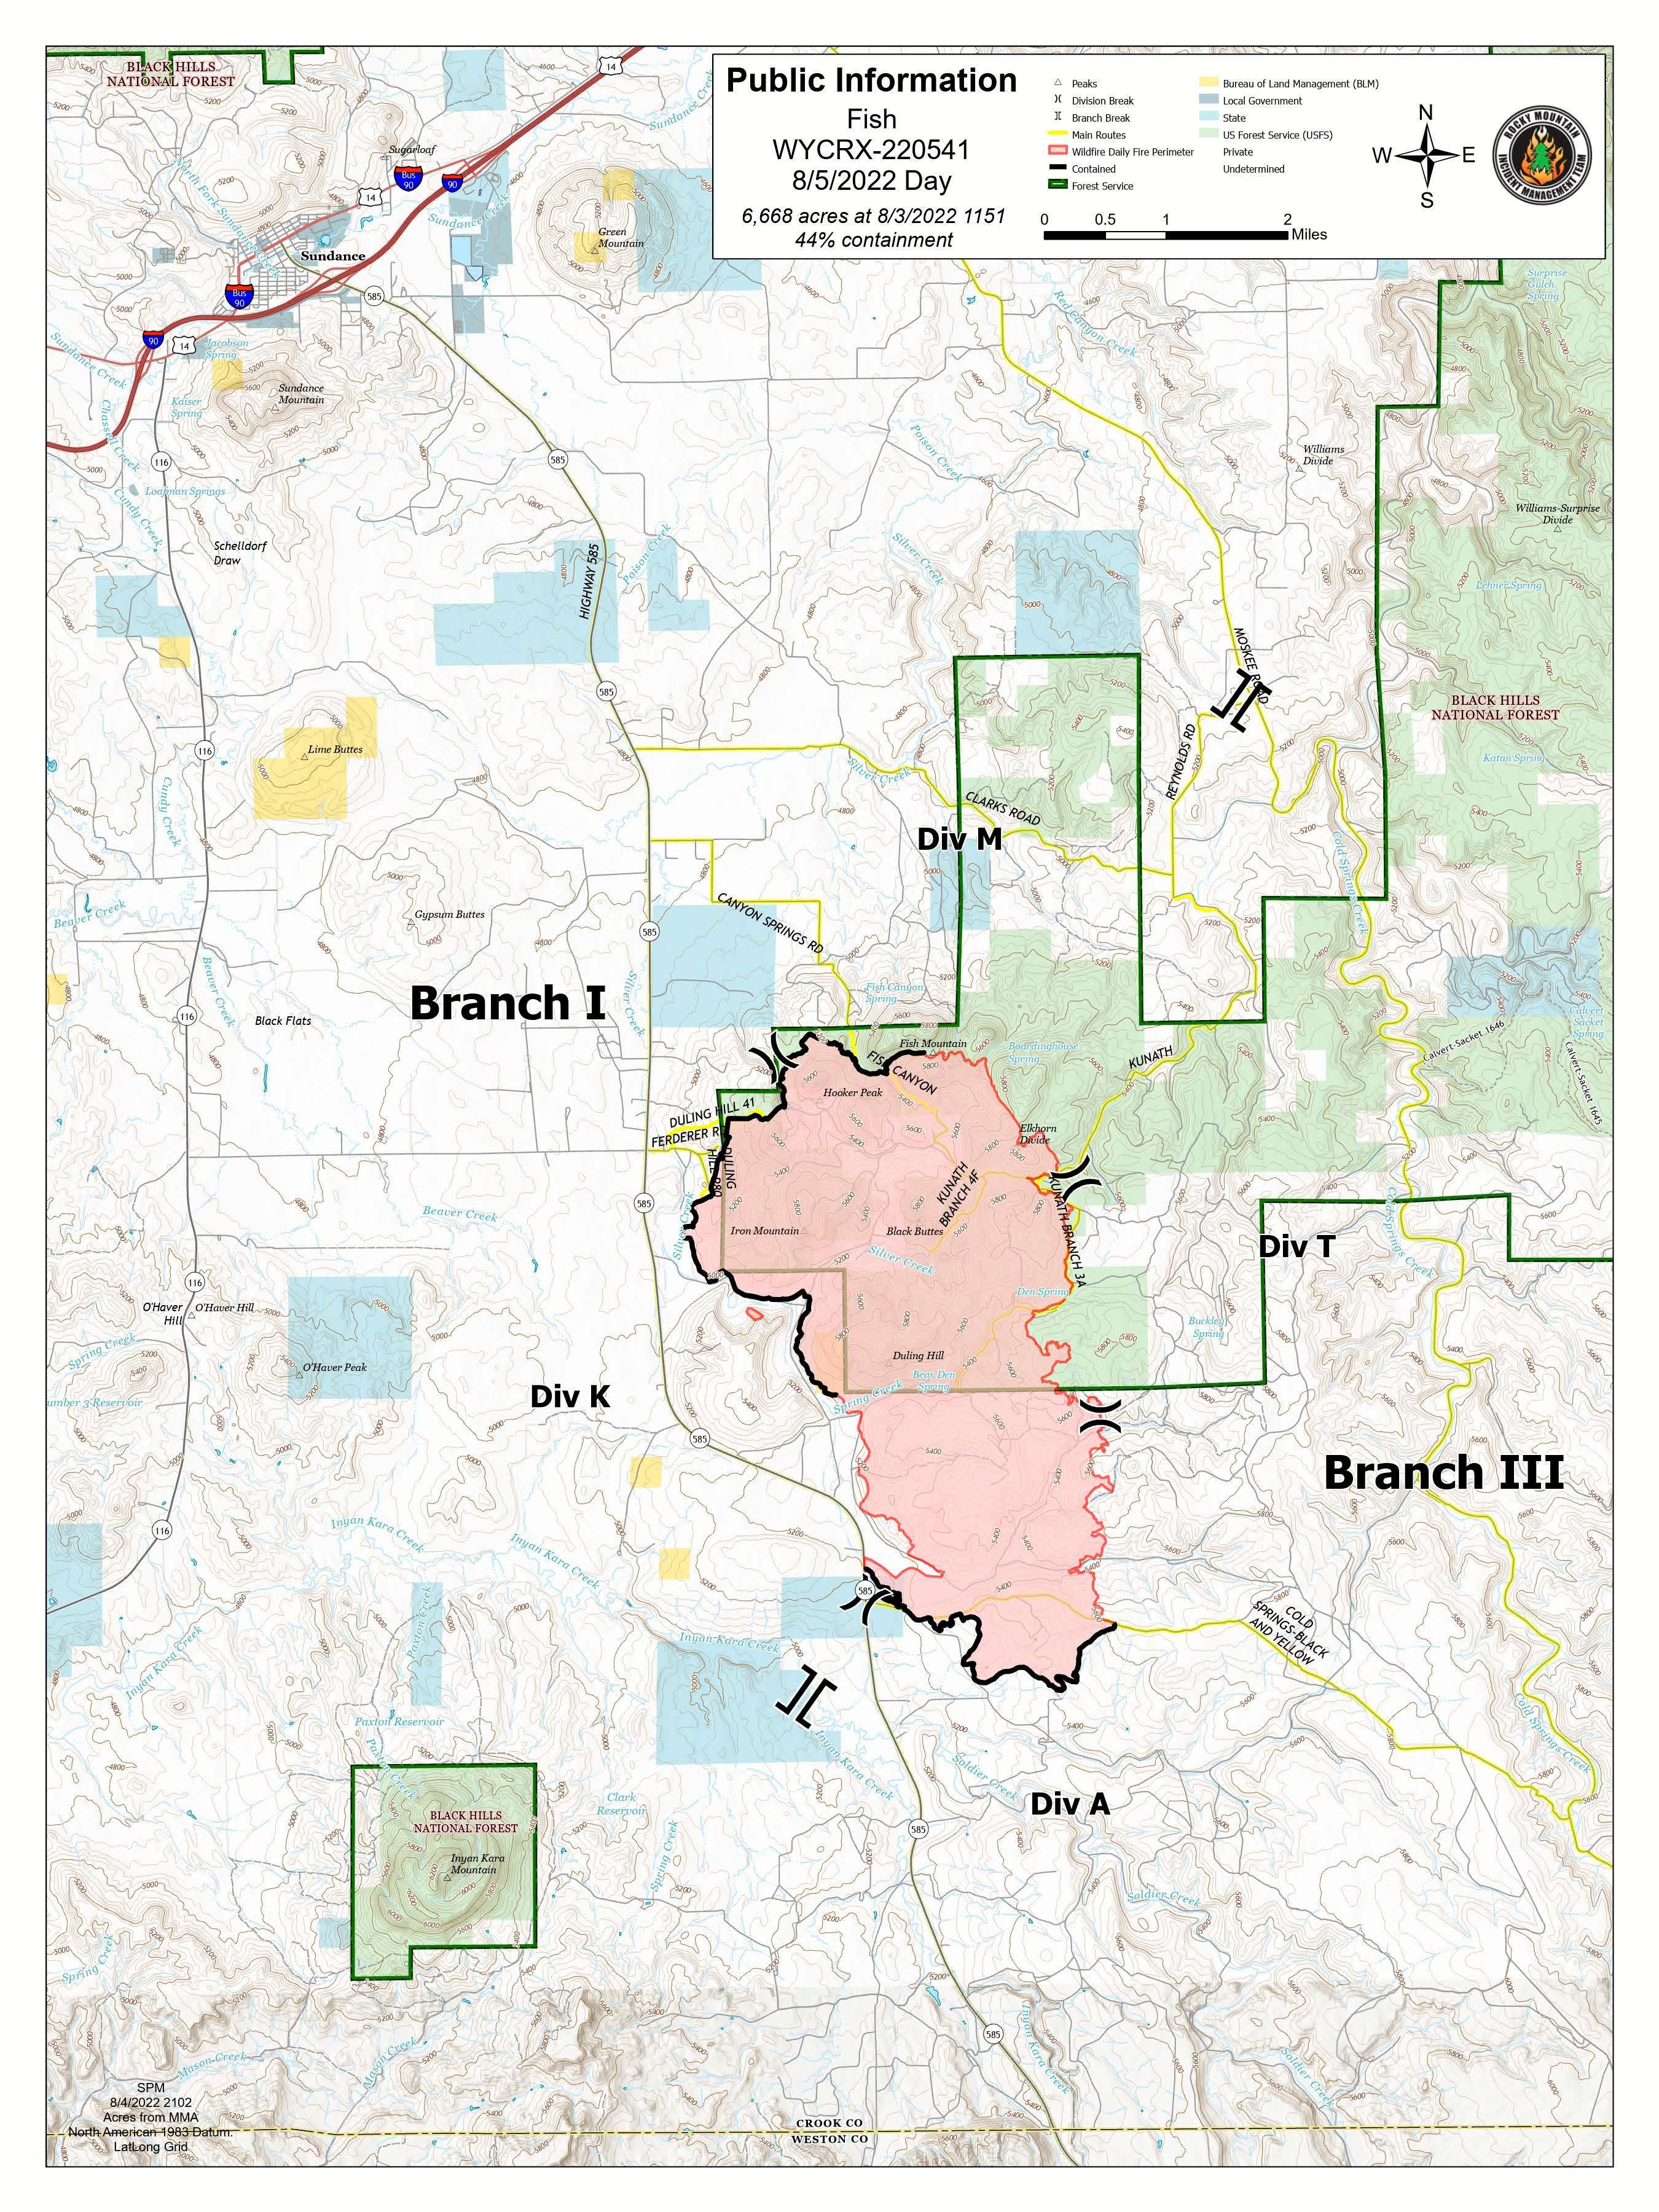 Fish Fire map, Friday, August 5